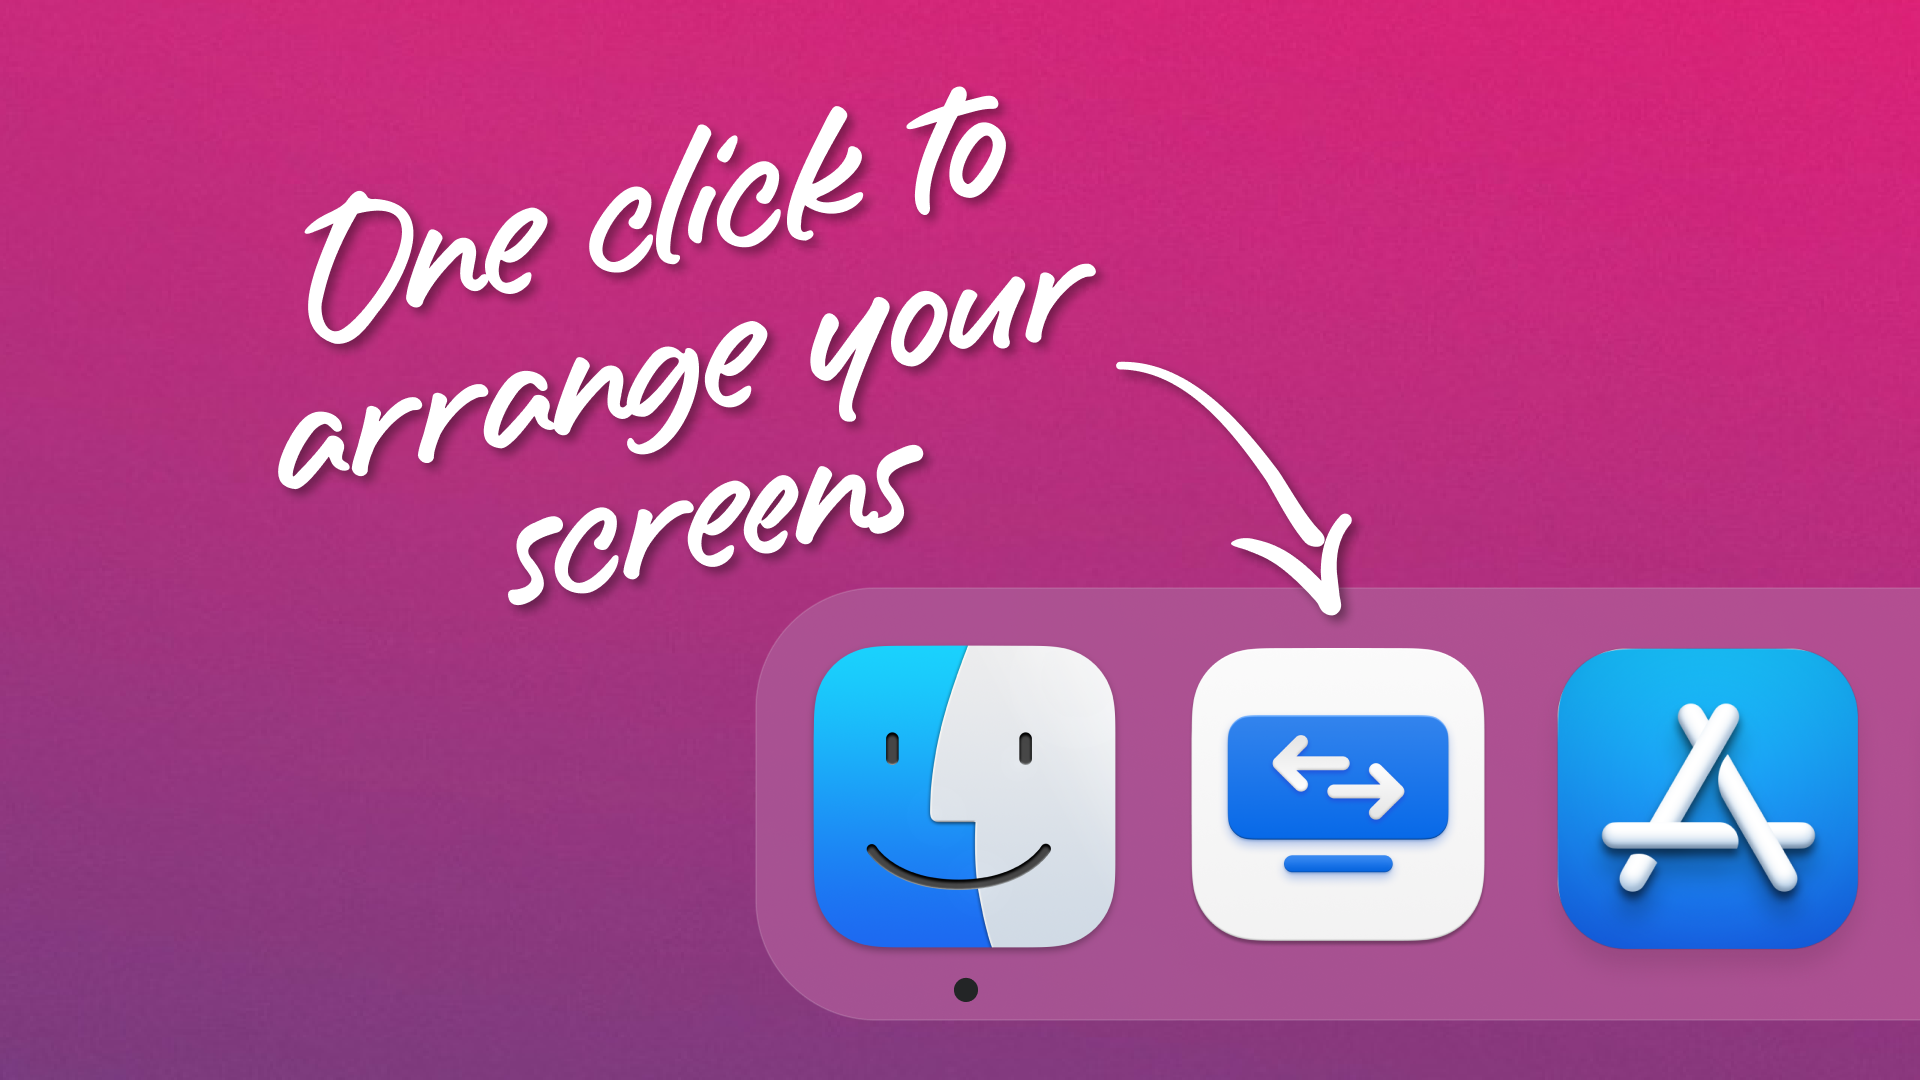 Handwritten "One click to arrange your screens" with an arrow pointing to a custom app in a MacOS Dock